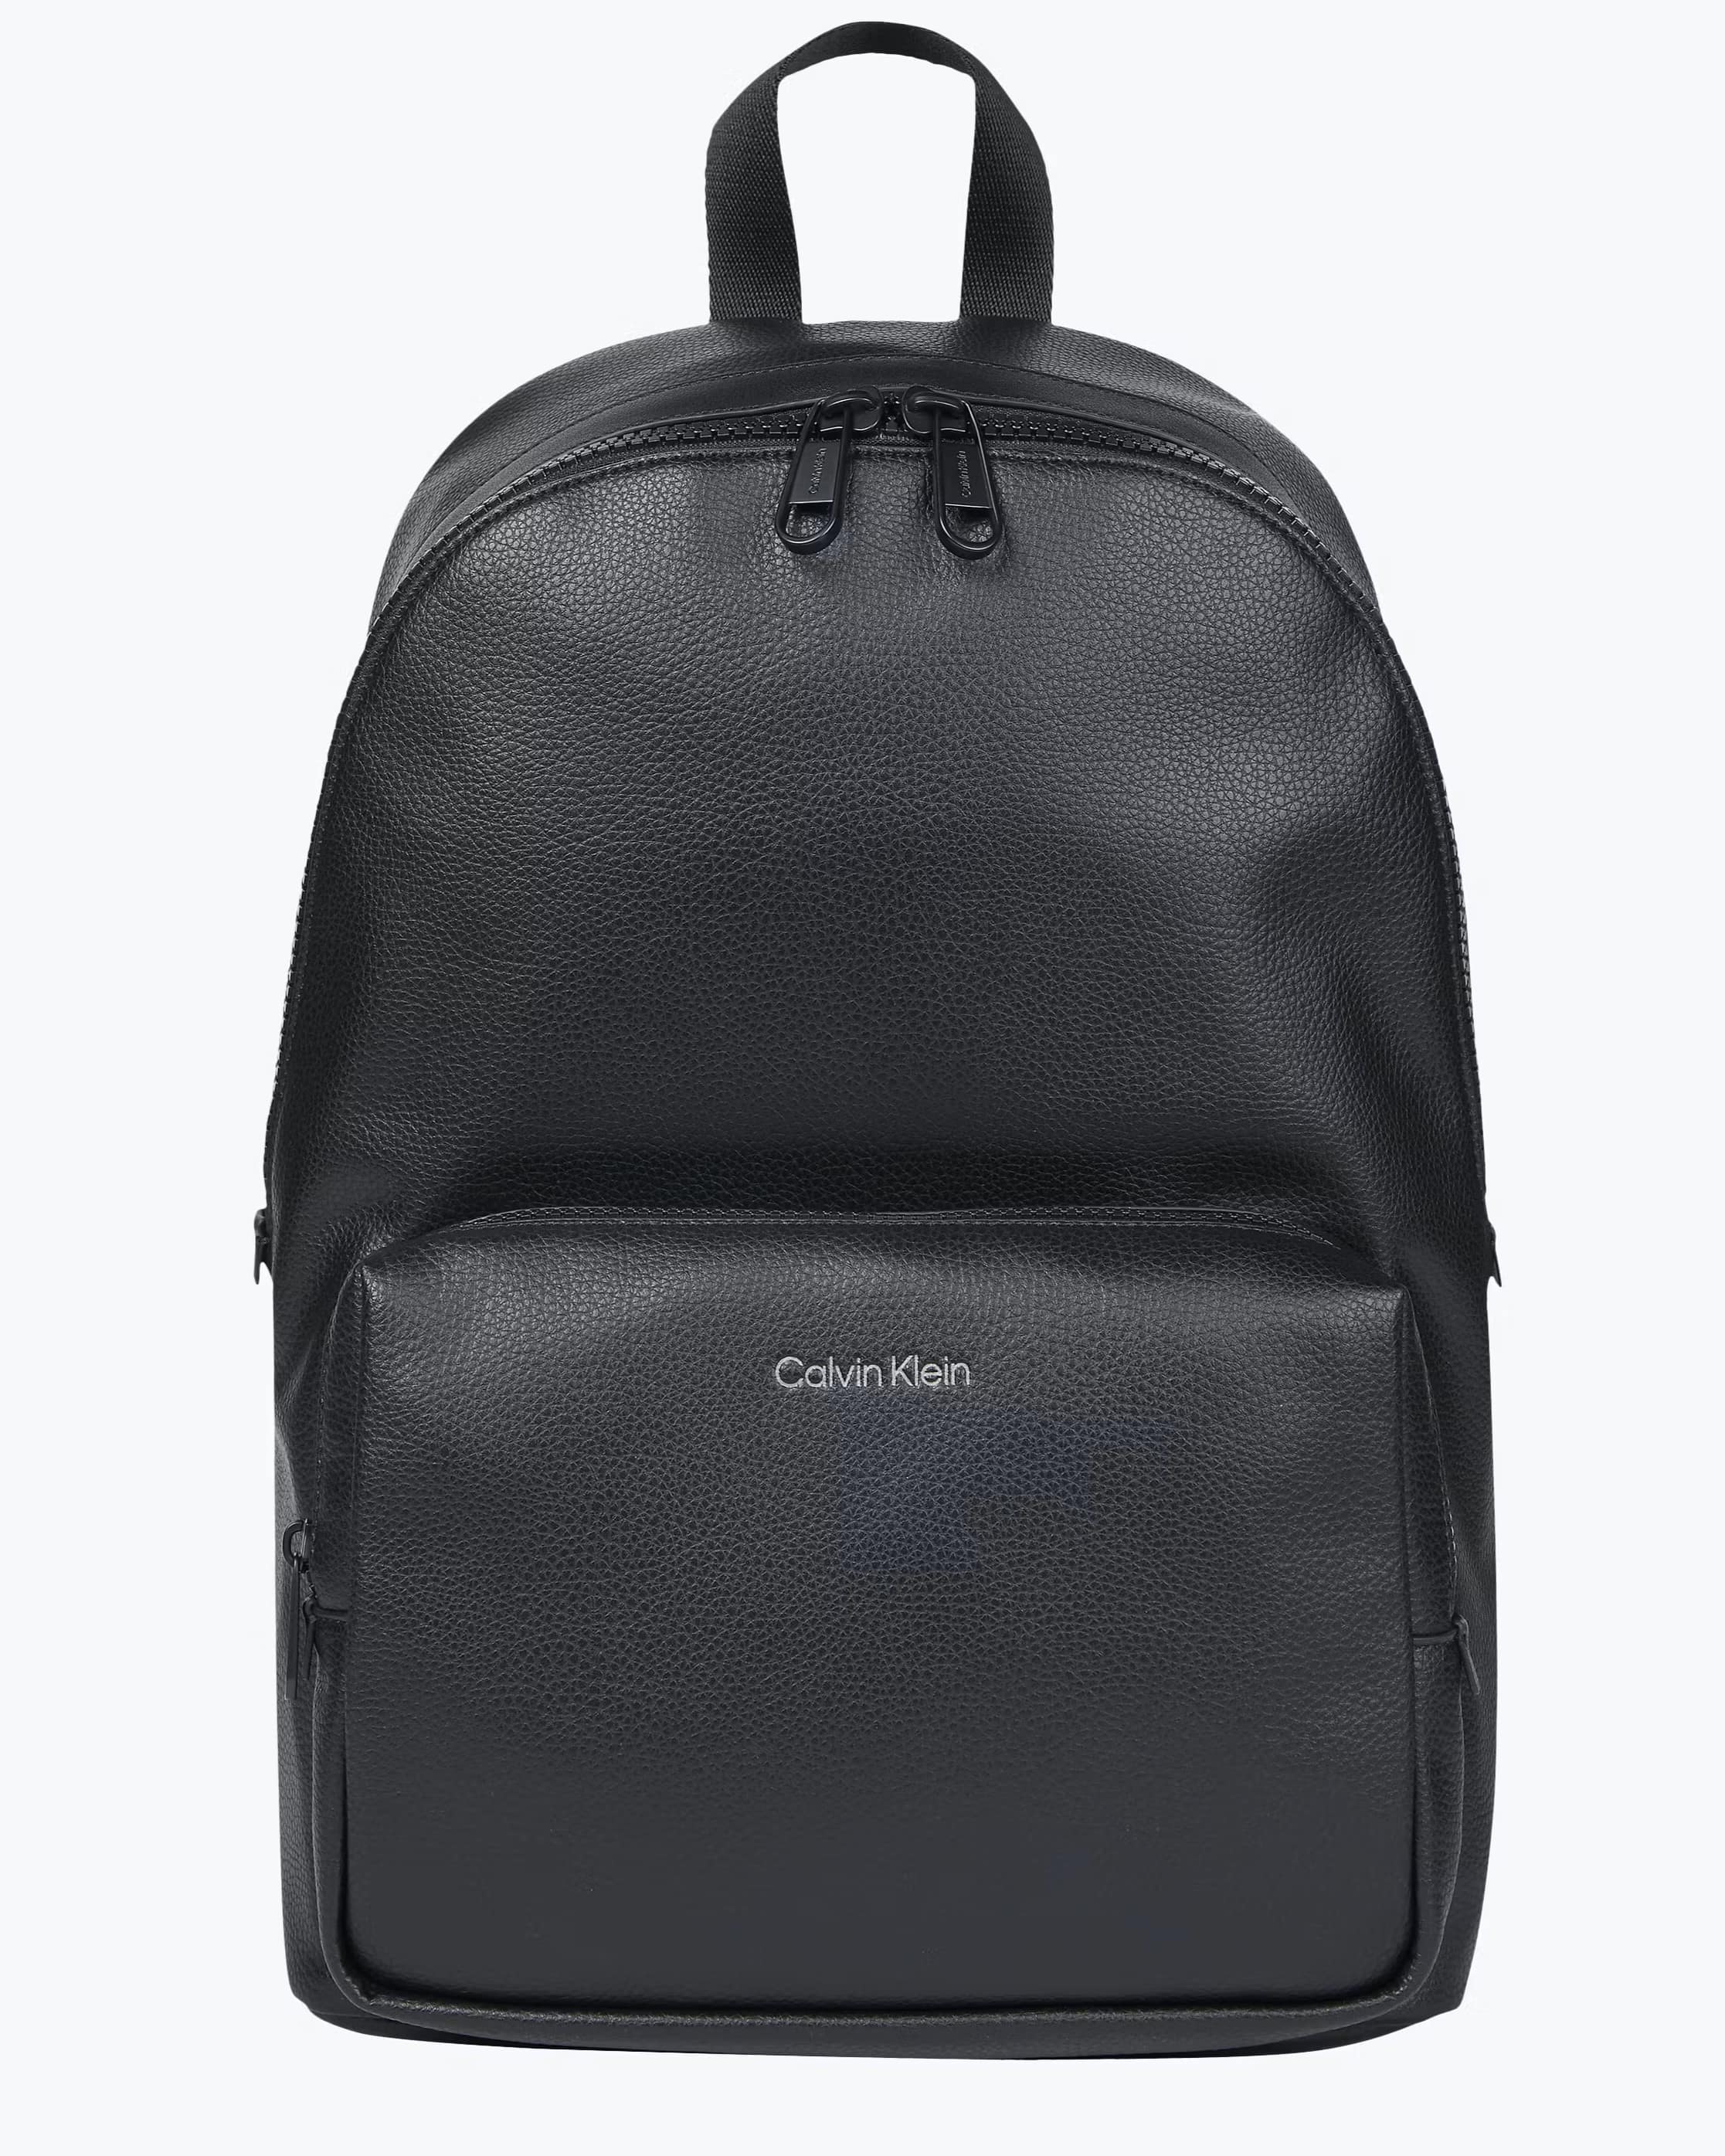 BALO CK CALVIN KLEIN CAMPUS FAUX LEATHER BACKPACK K50K508696 2